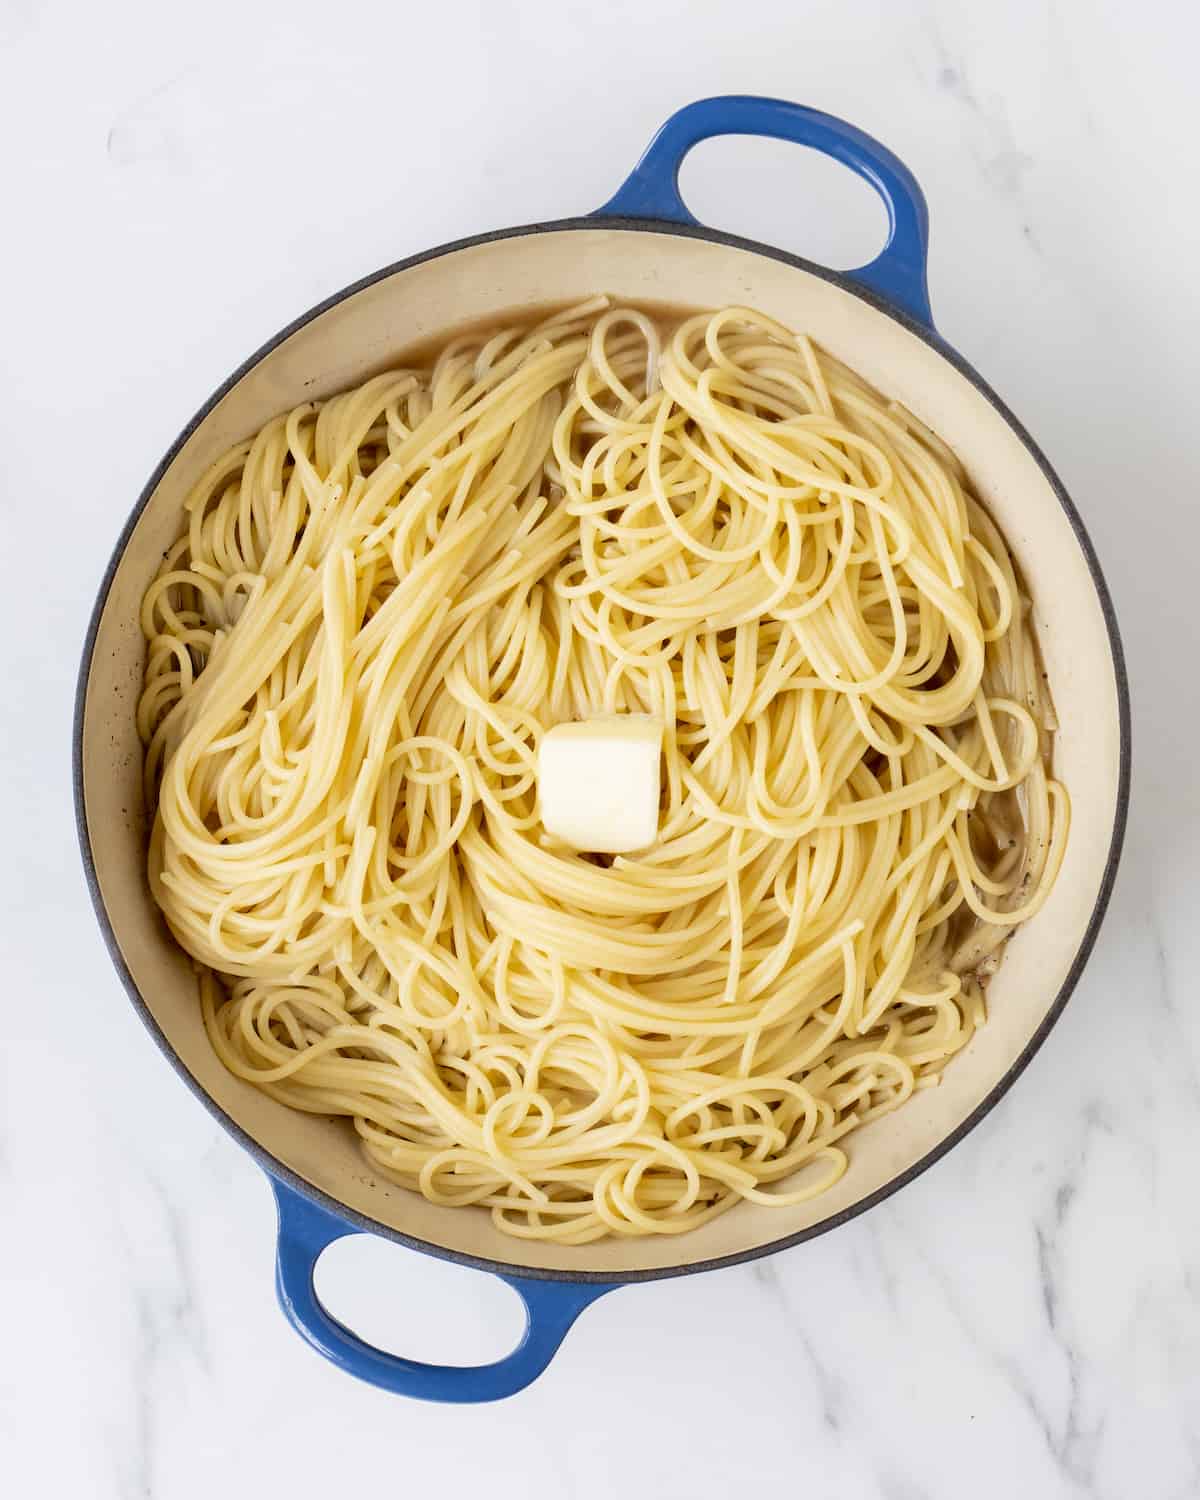 A large skillet with cooked spaghetti and a chunk of unmelted butter.  